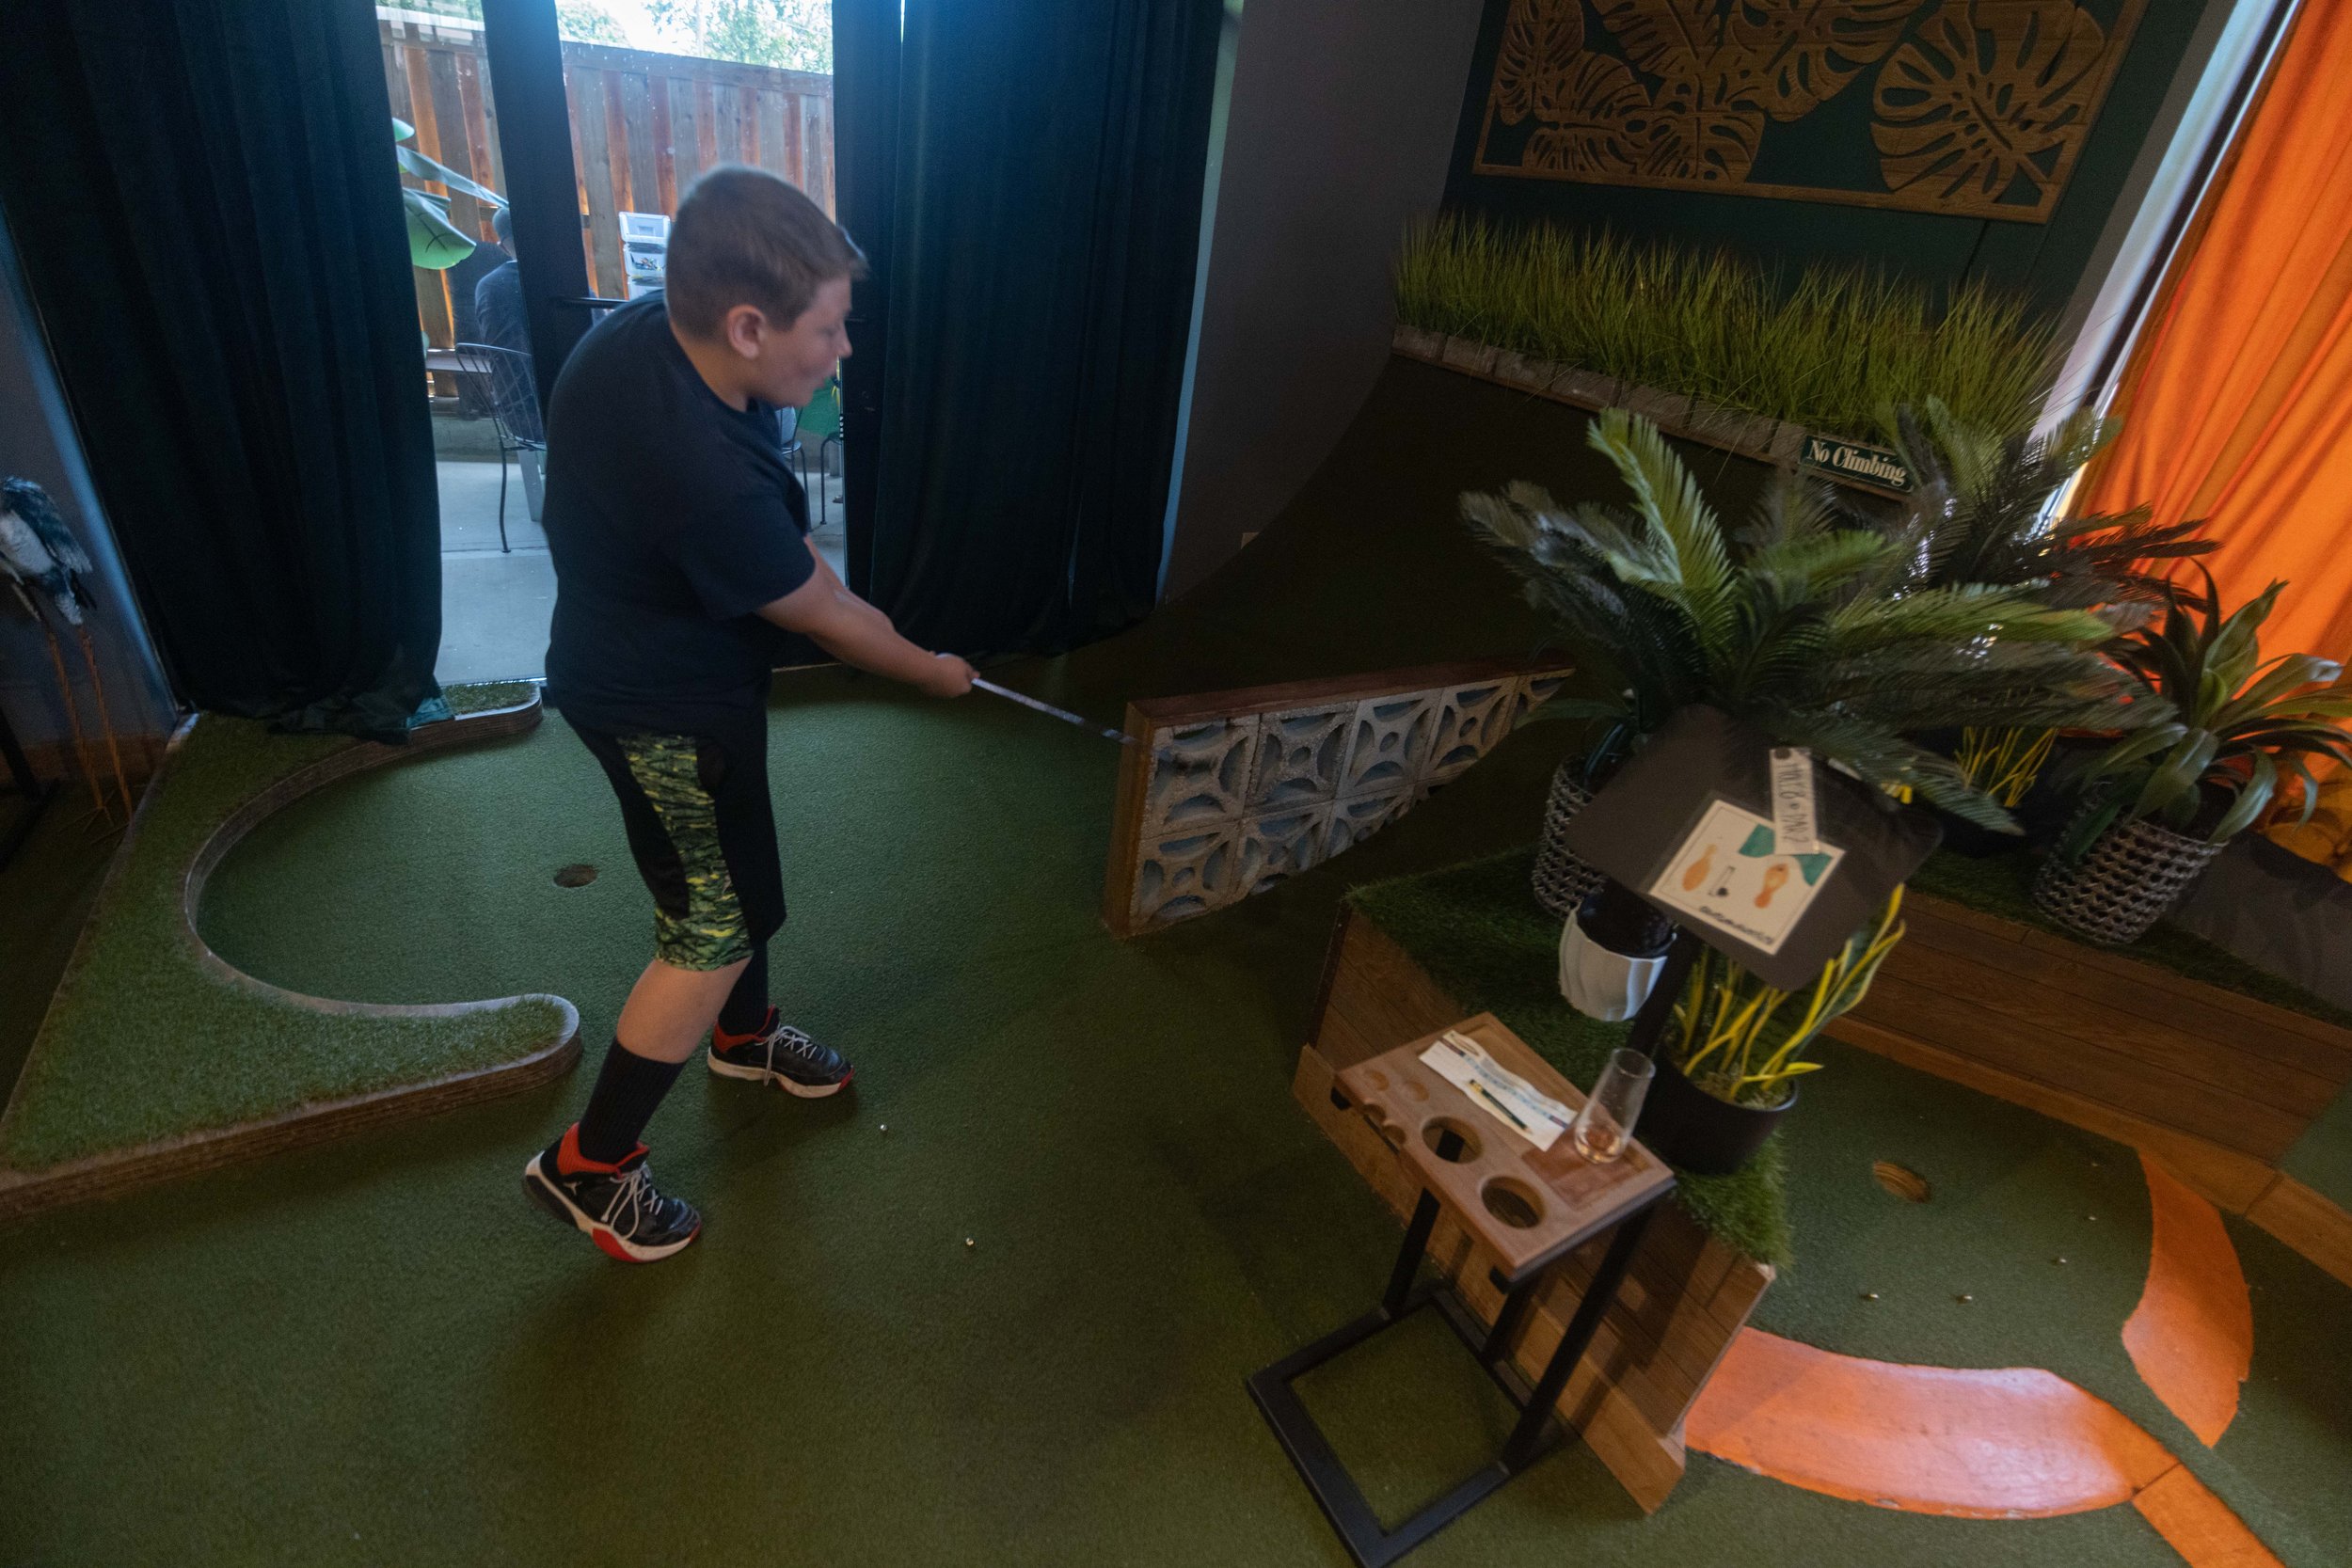  Attendee playing mini golf during Mini Golf Gathering for Grievers on 6.4.22 